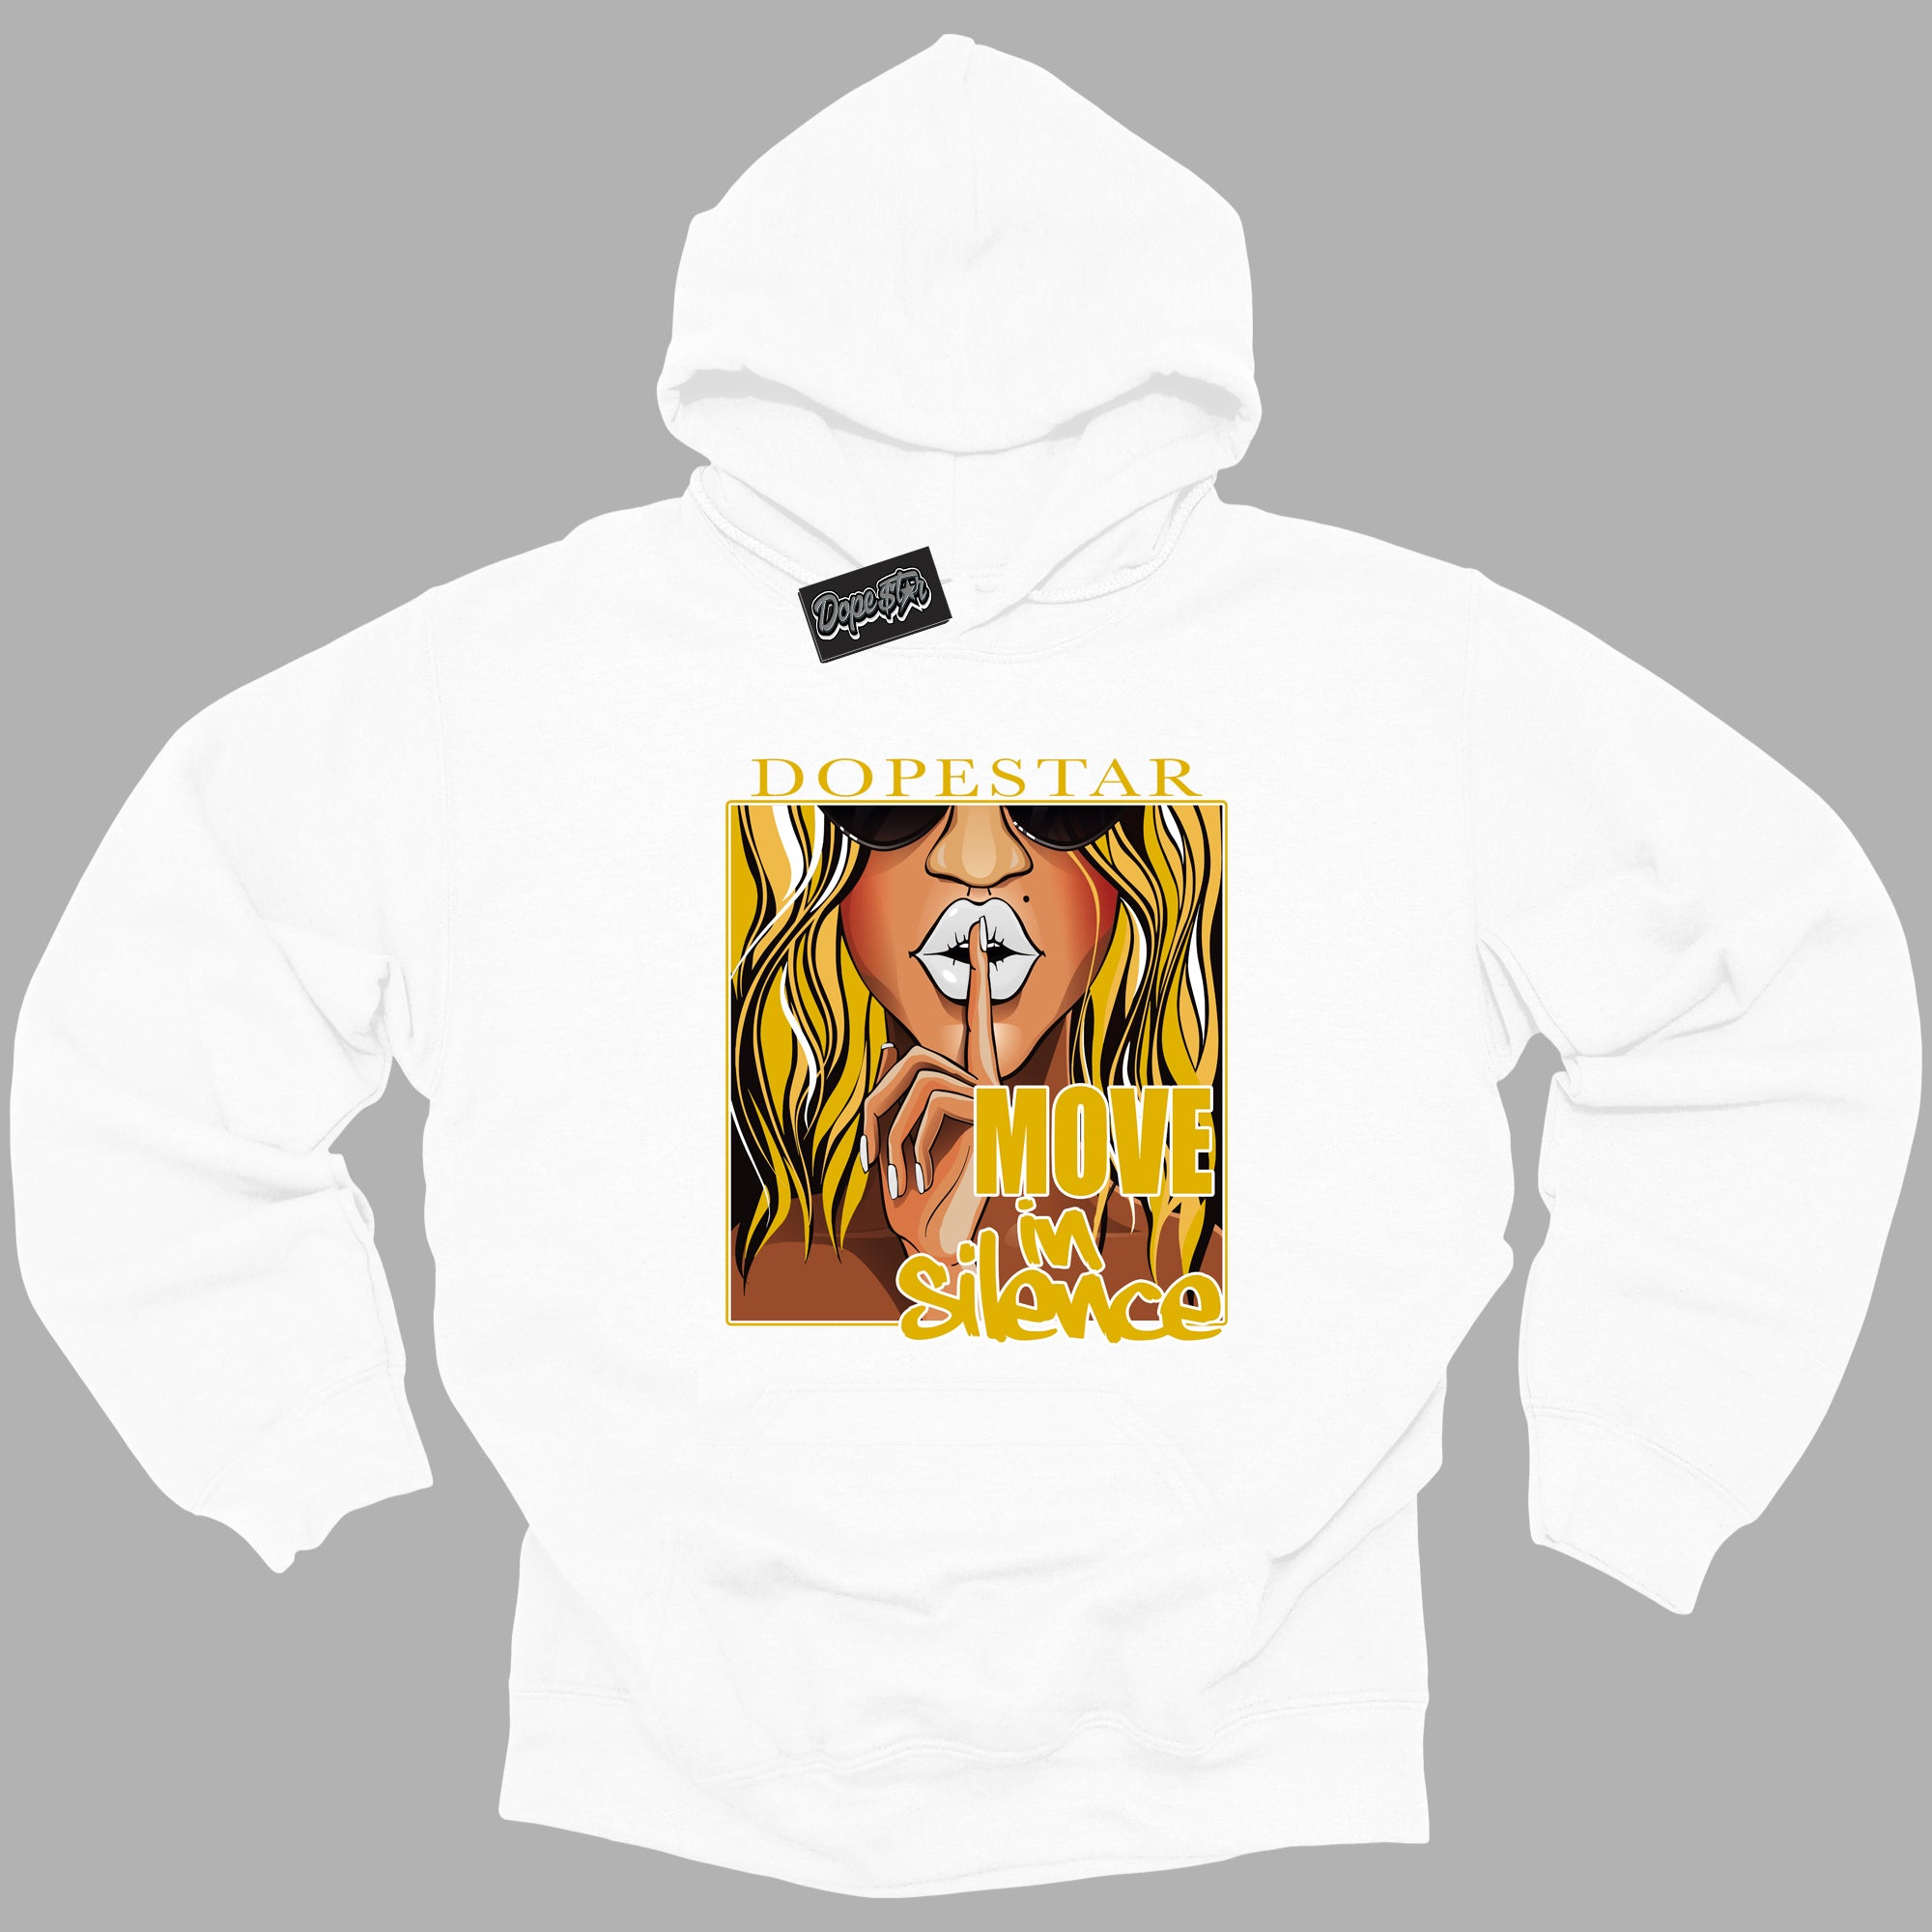 Cool White Hoodie with “ Move In Silence ”  design that Perfectly Matches Yellow Ochre 6s Sneakers.